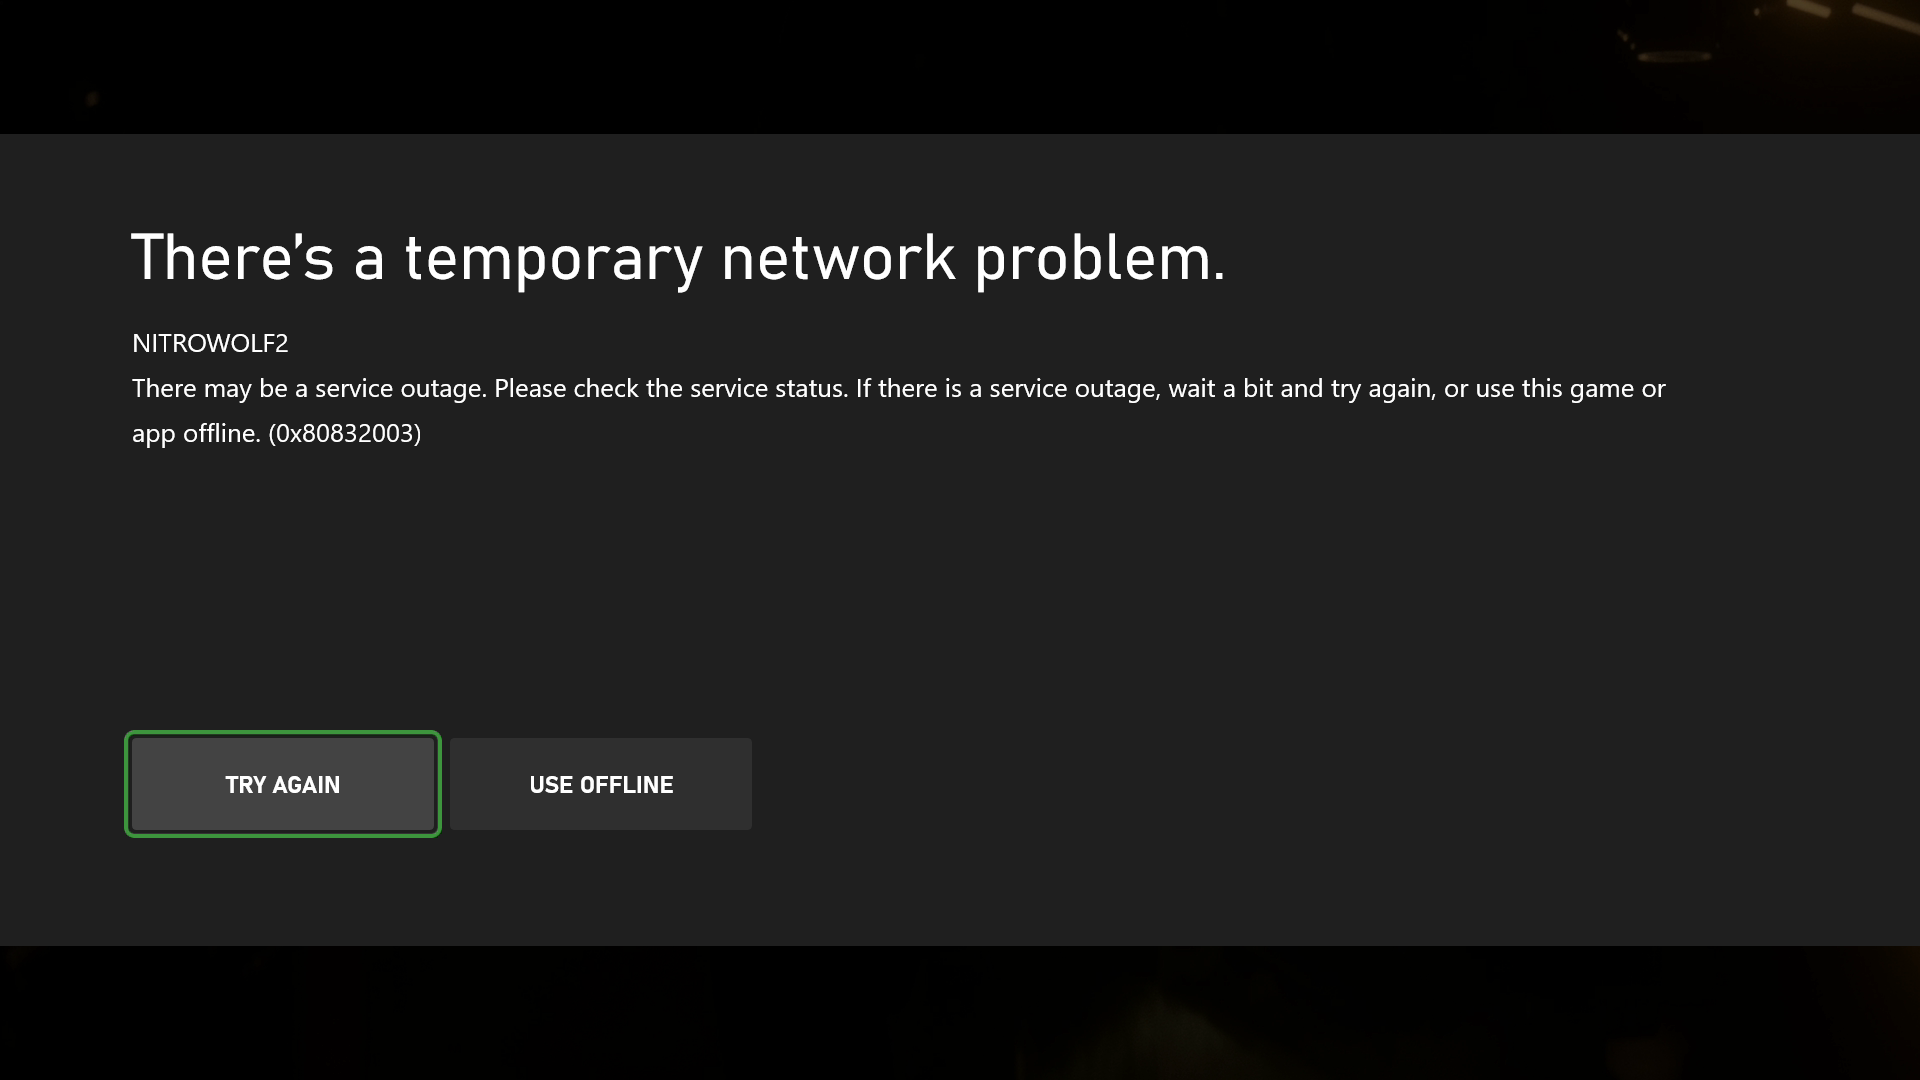 Visit the Xbox Live Service Status page on the Xbox website.
Verify if there are any ongoing issues or outages that could affect signing in.